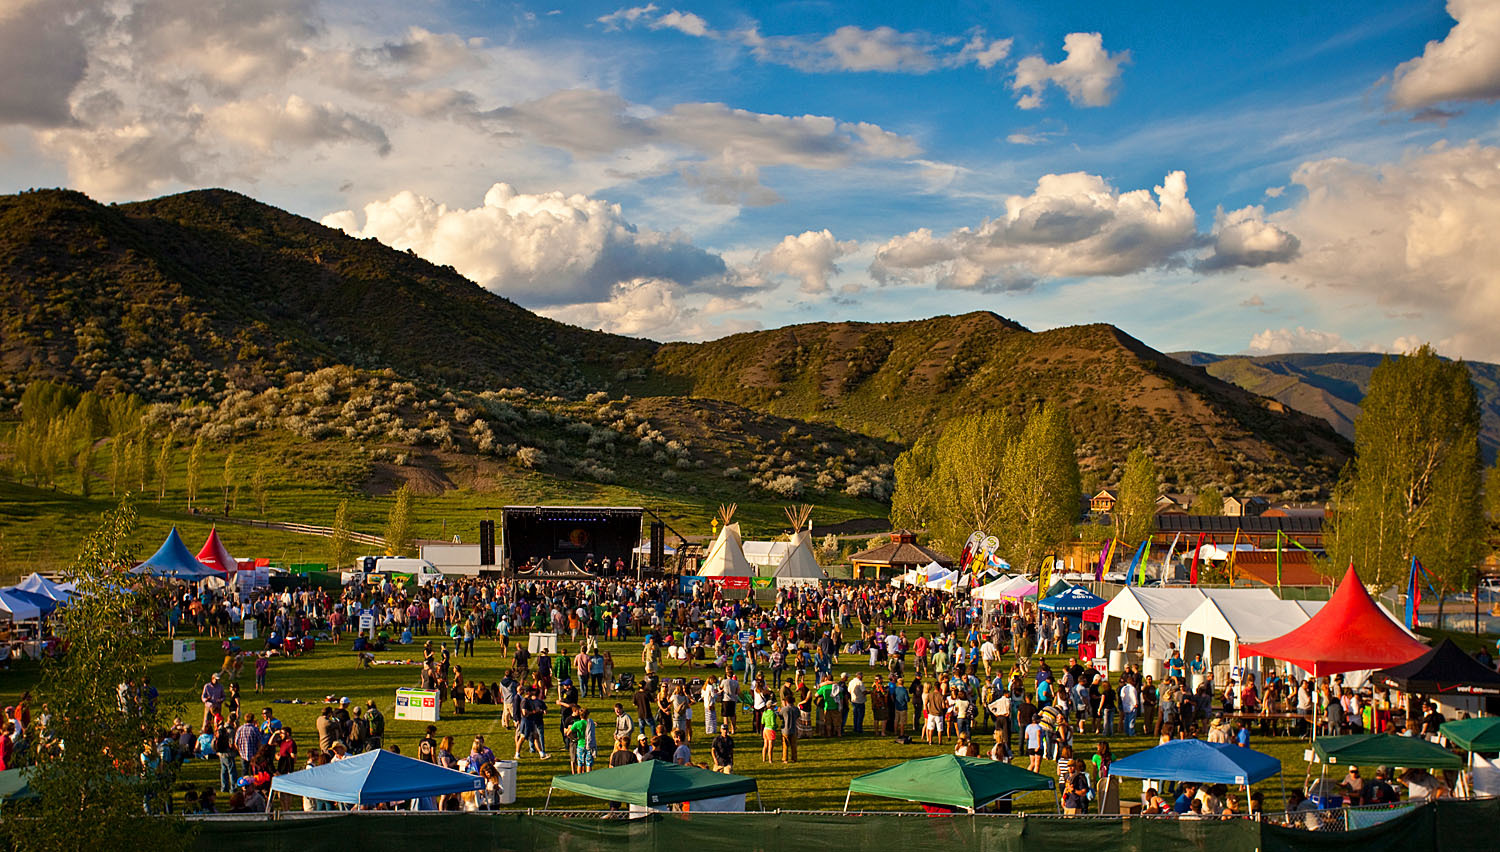 Concerts at Snowmass - USA for Teenagers